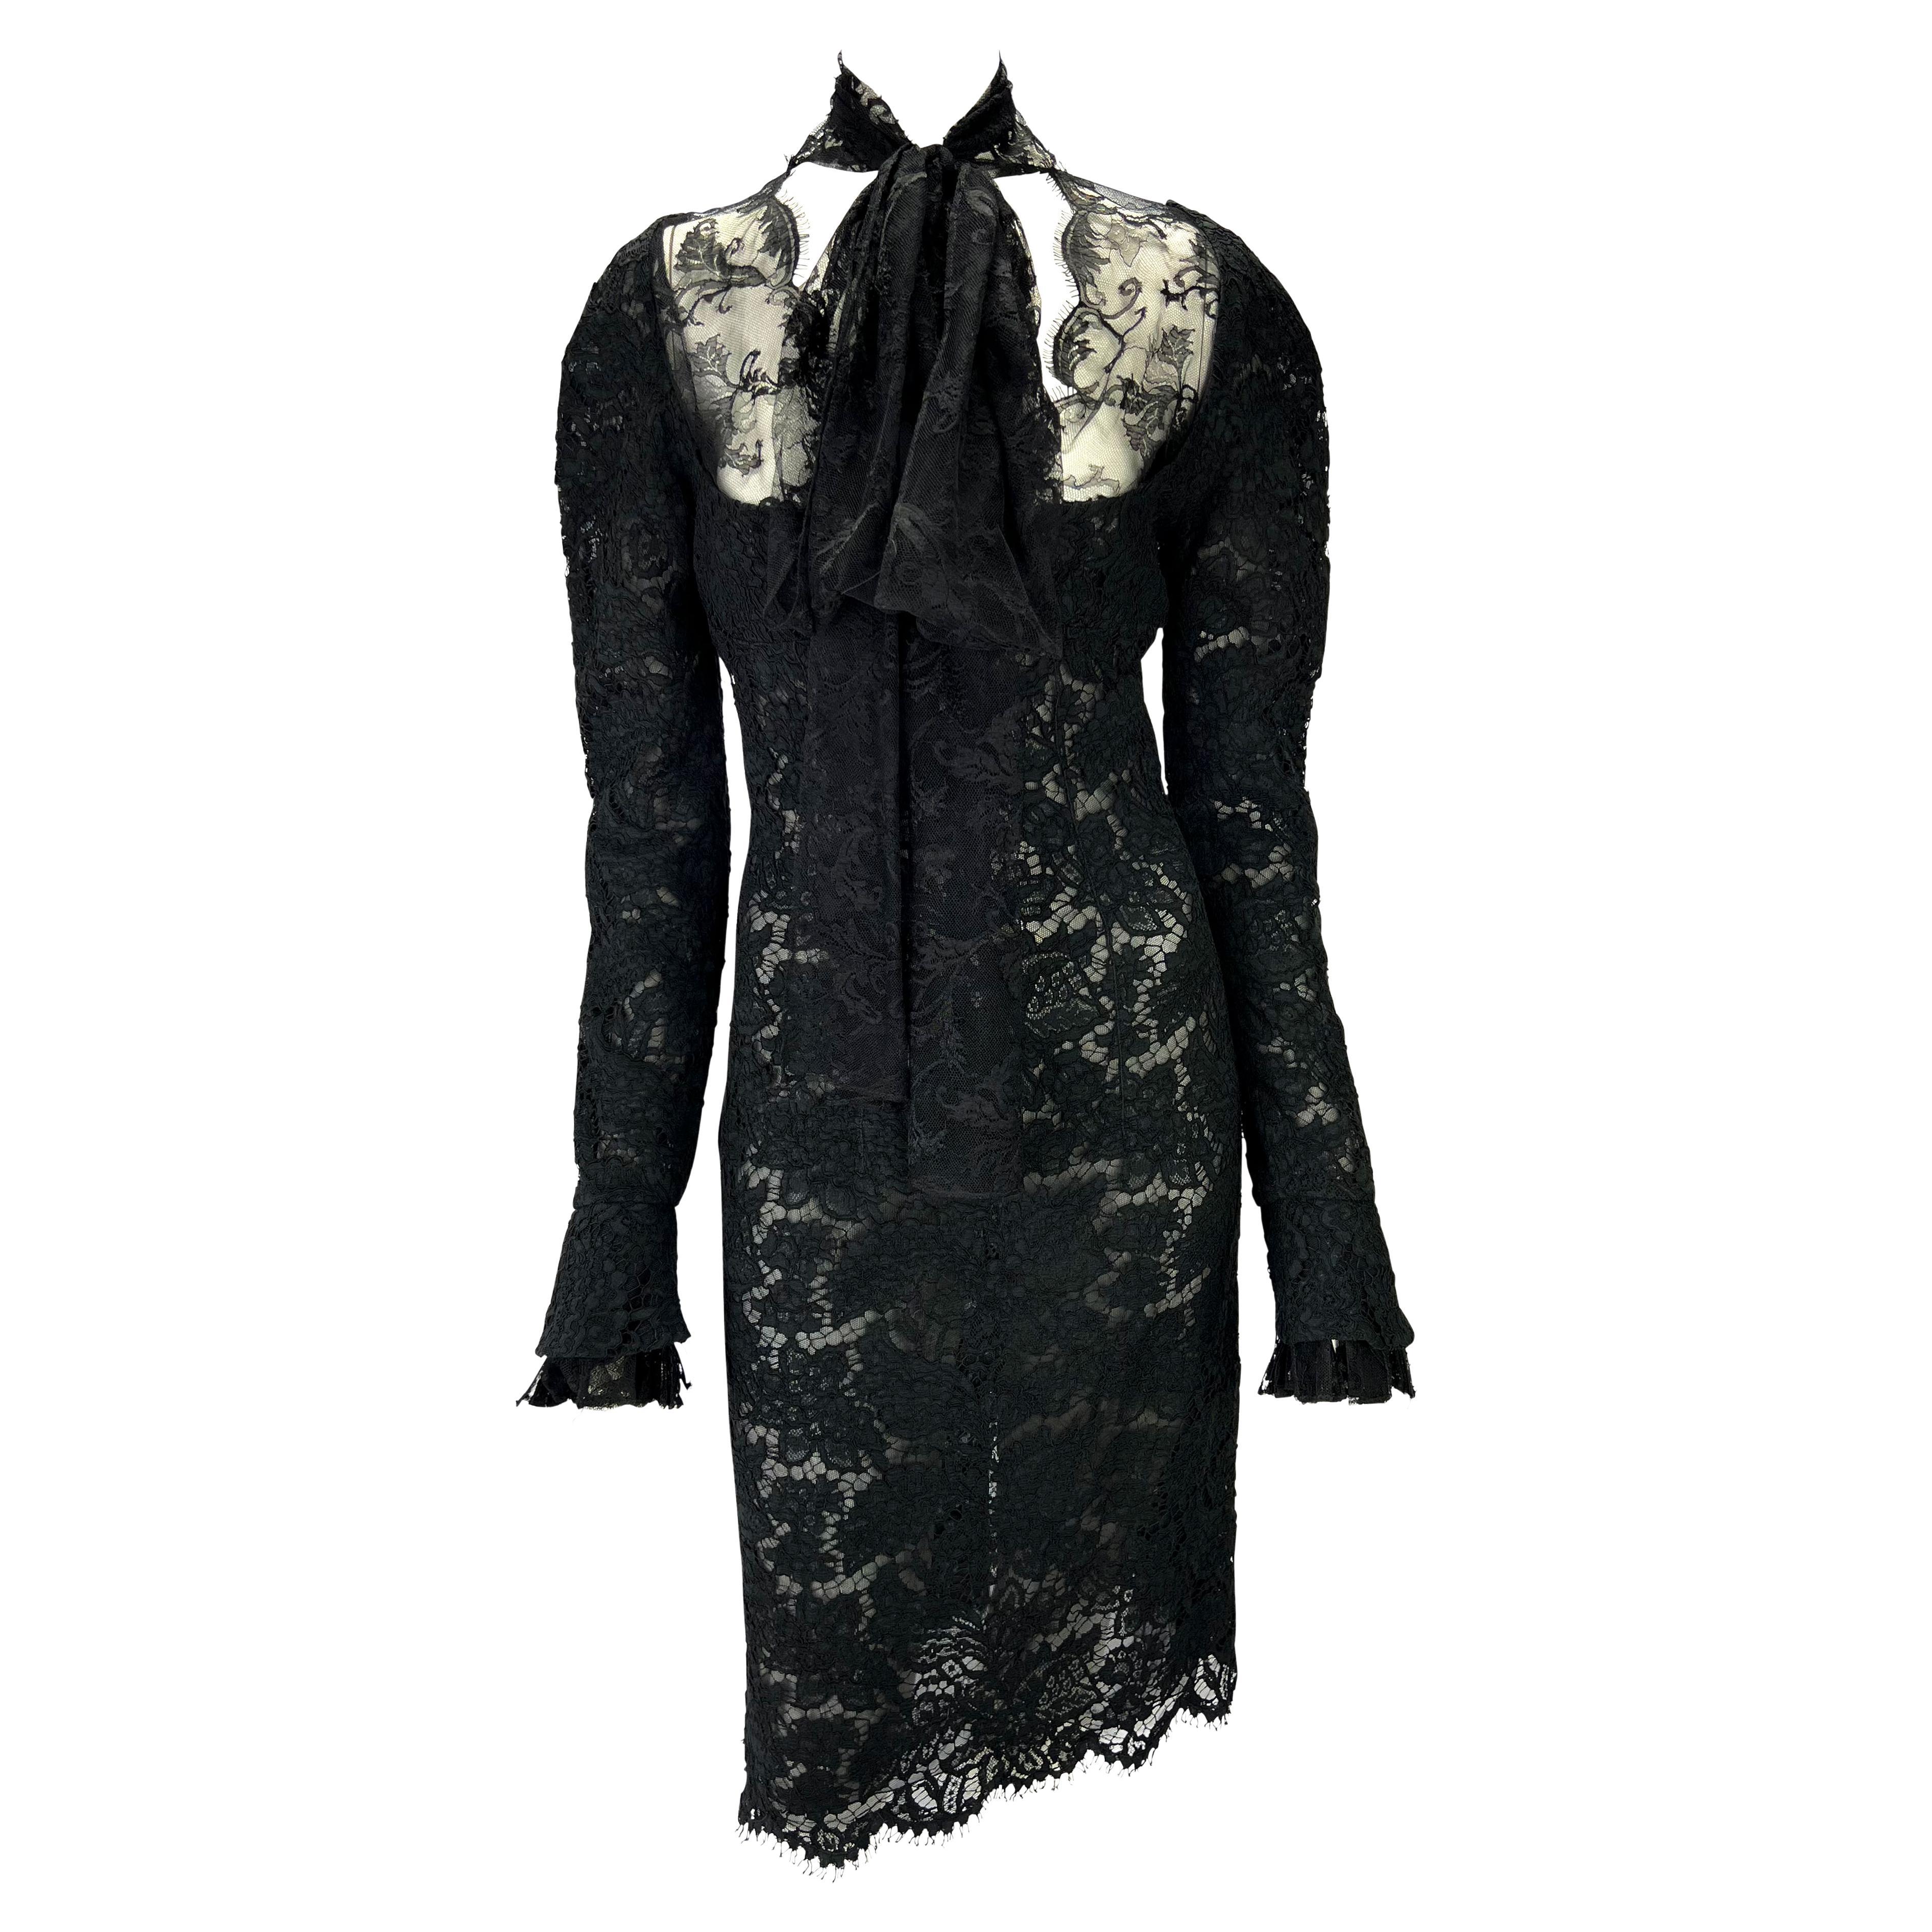 F/W 2002 Yves Saint Laurent by Tom Ford Runway Sheer Black Lace Poet's Dress For Sale